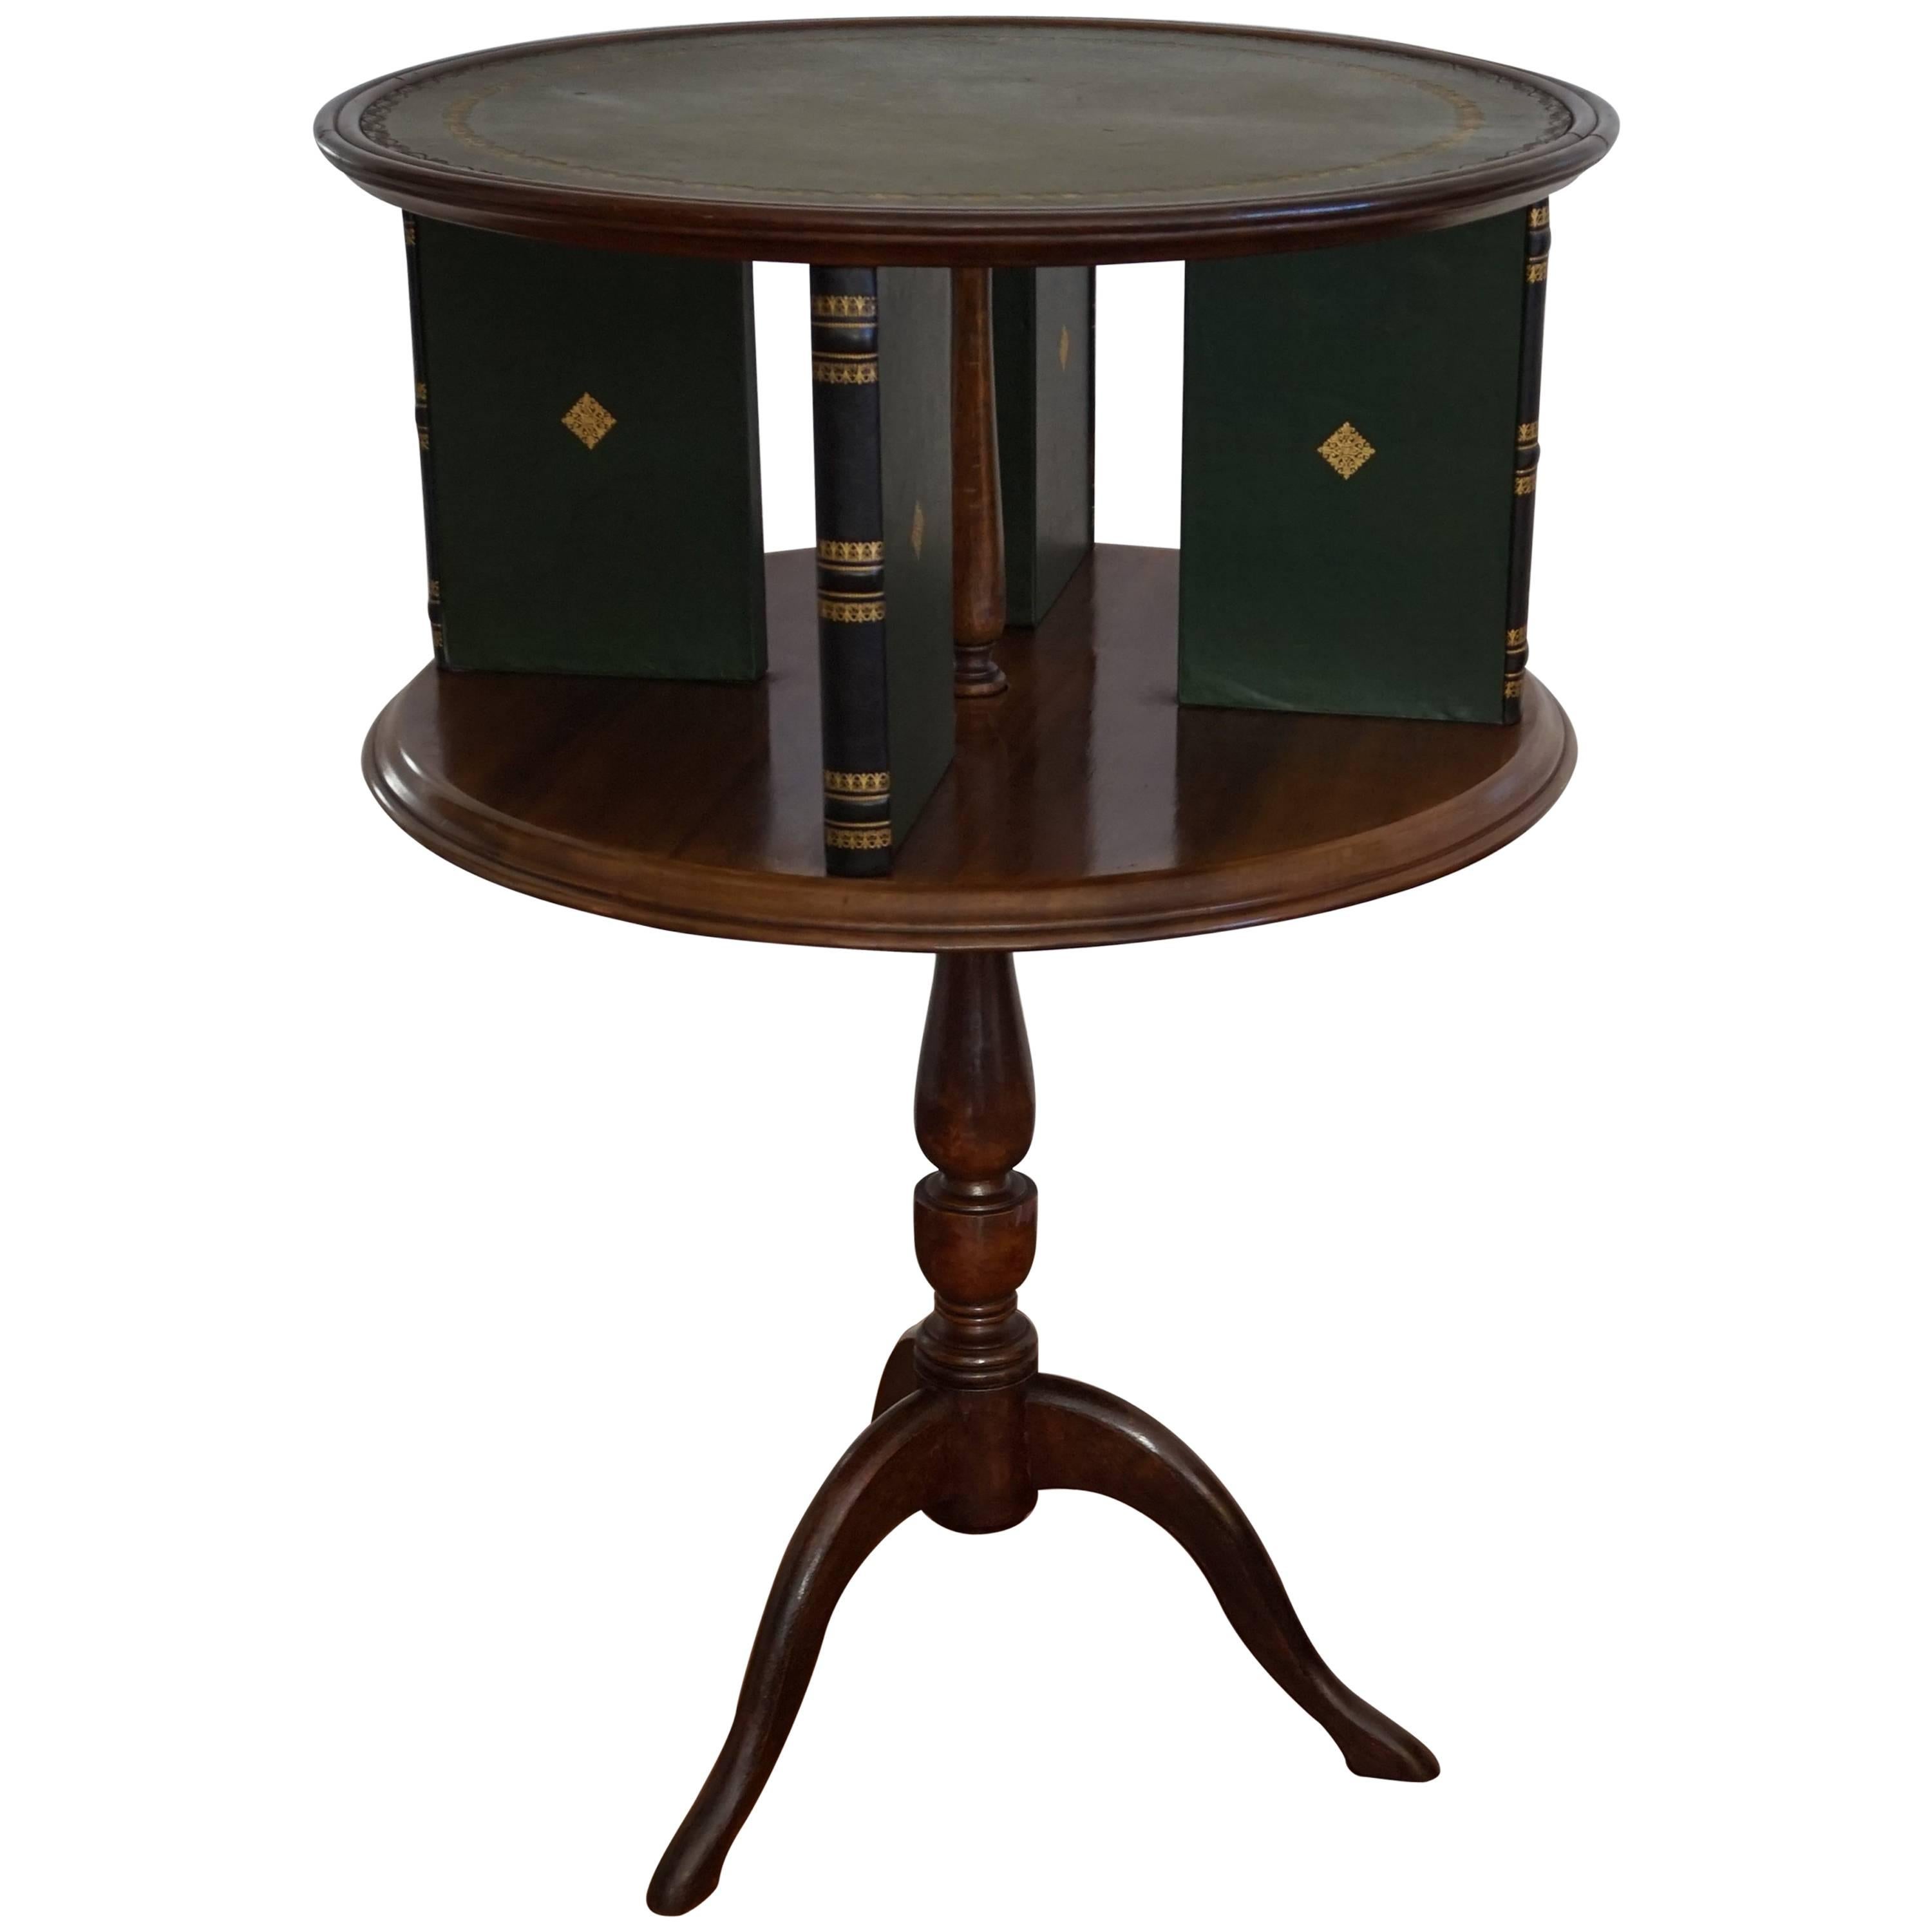 Revolving Bookcase / Mahogany Color Leather Inlaid Drinks Table